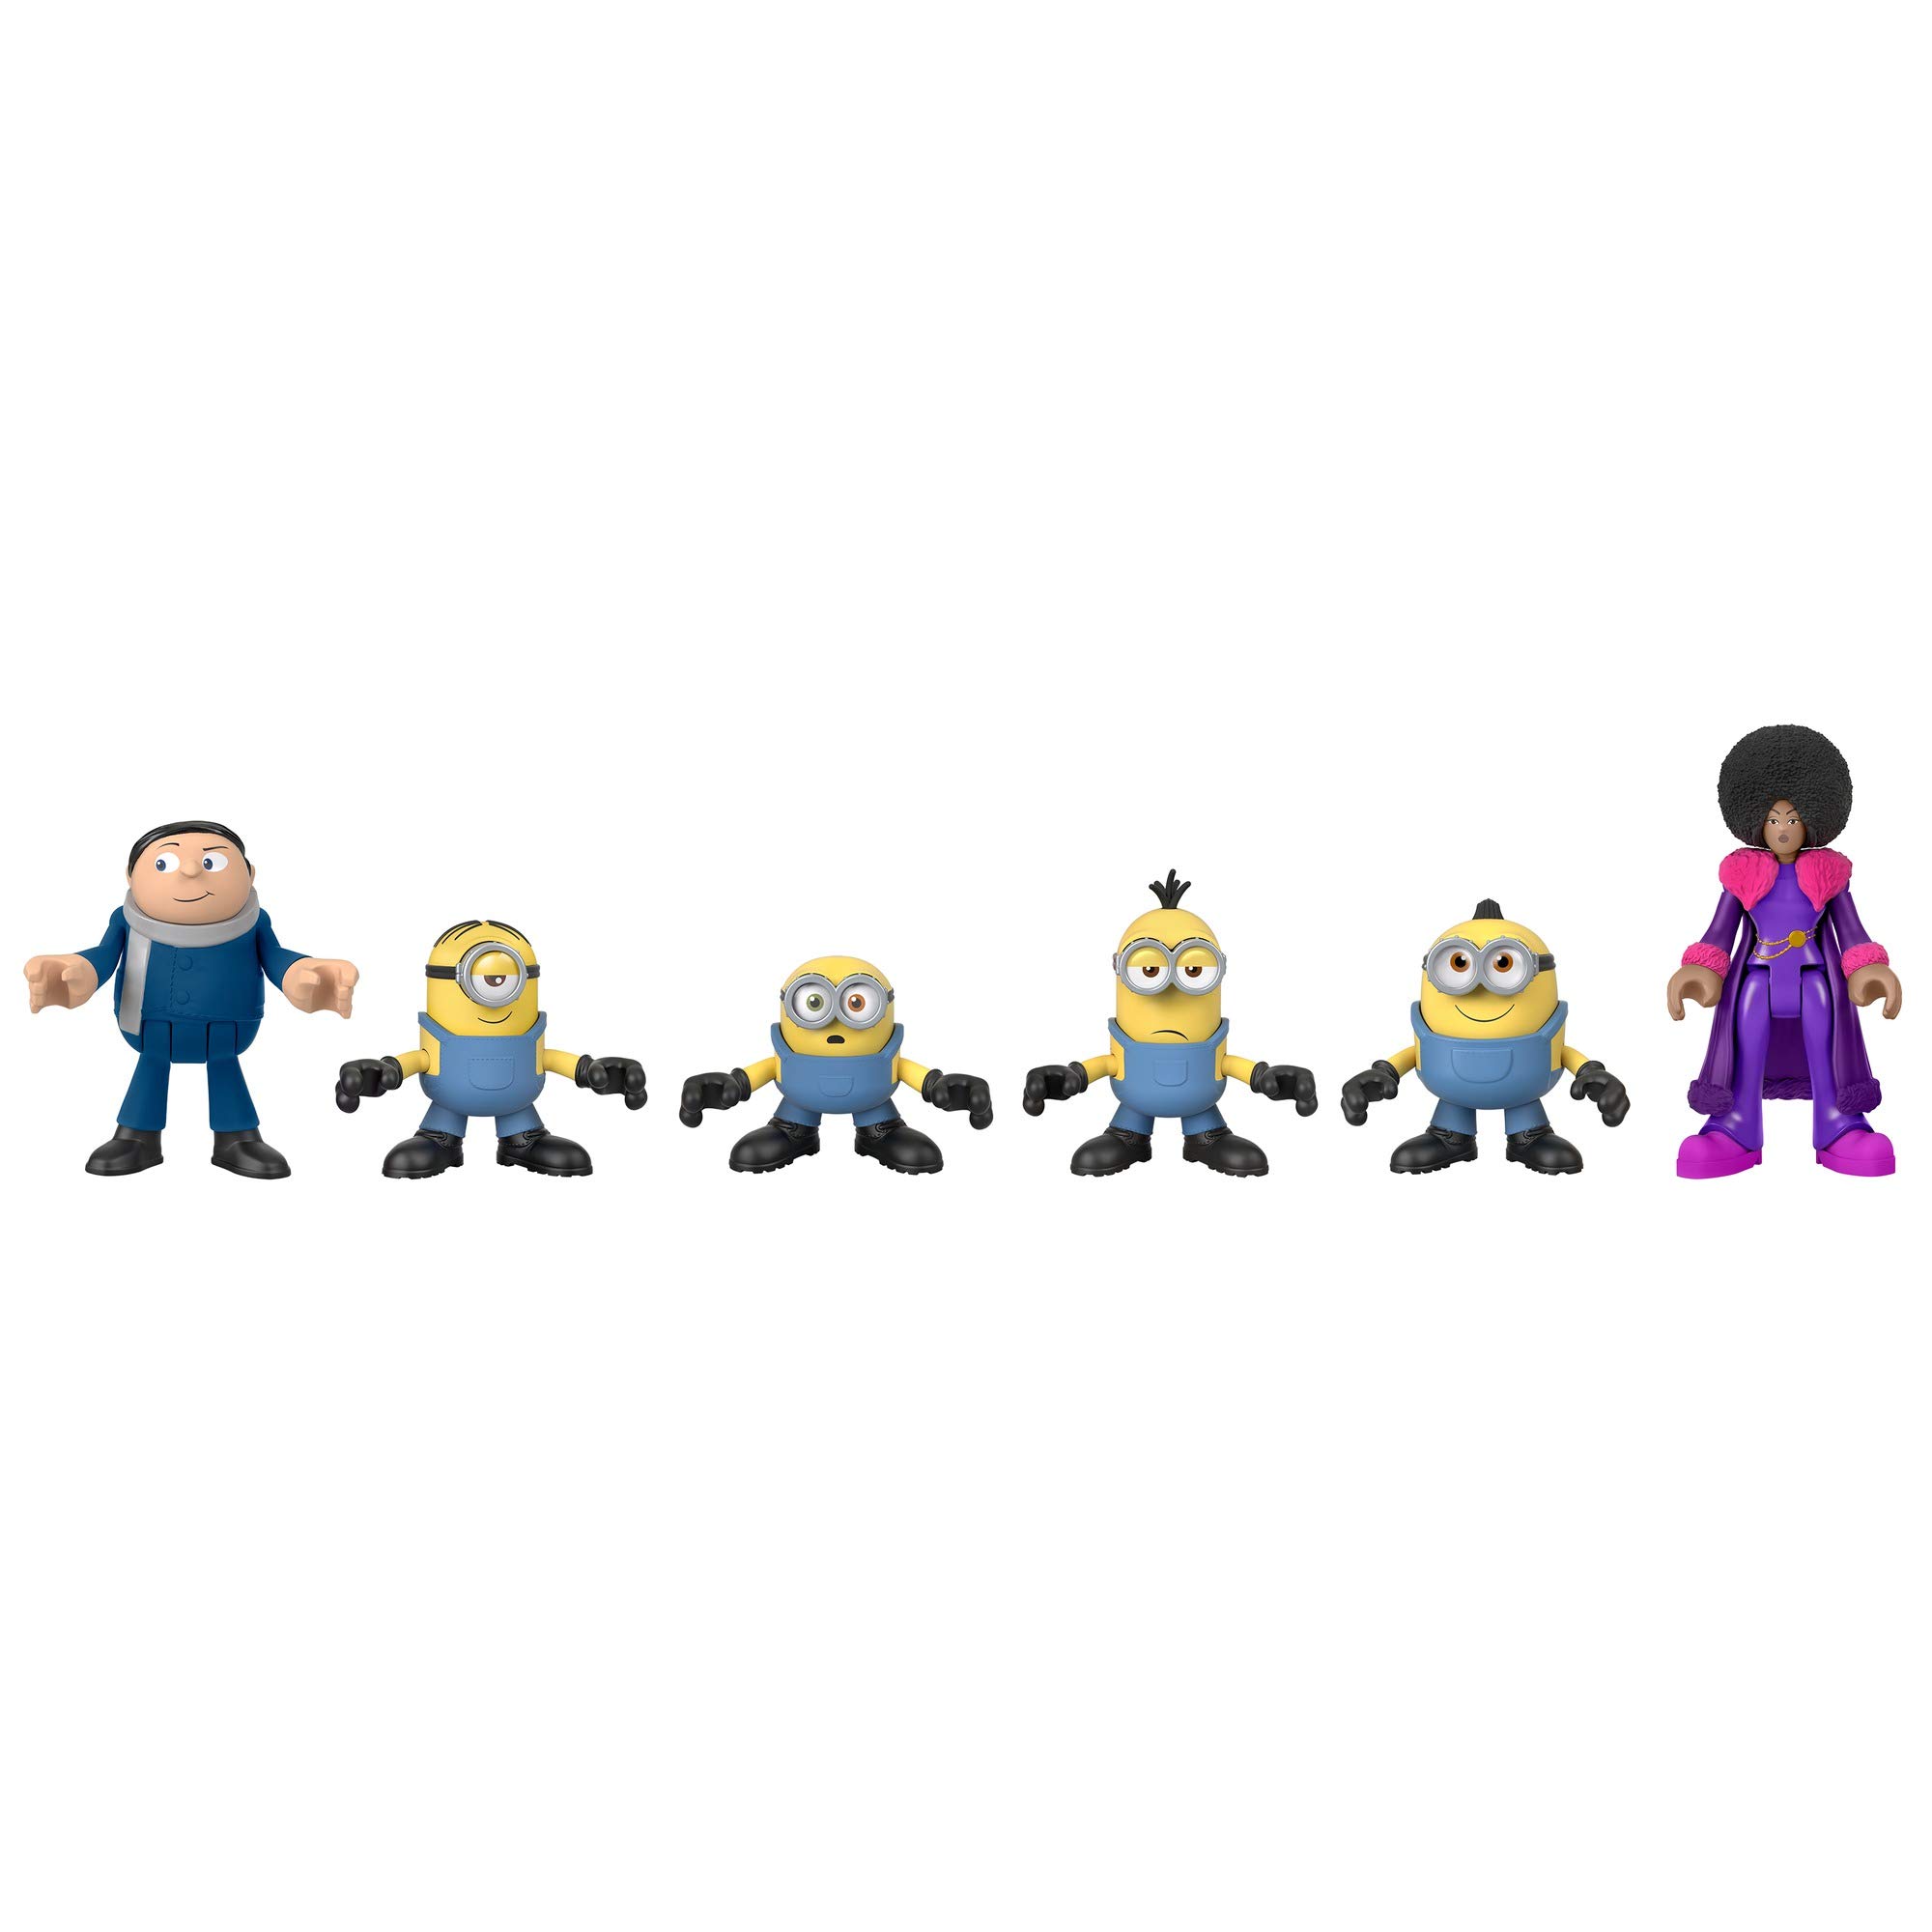 Imaginext Minions The Rise of Gru Figure Pack, Set of 6 Poseable Movie Characters for Preschool Kids Ages 3 and Up